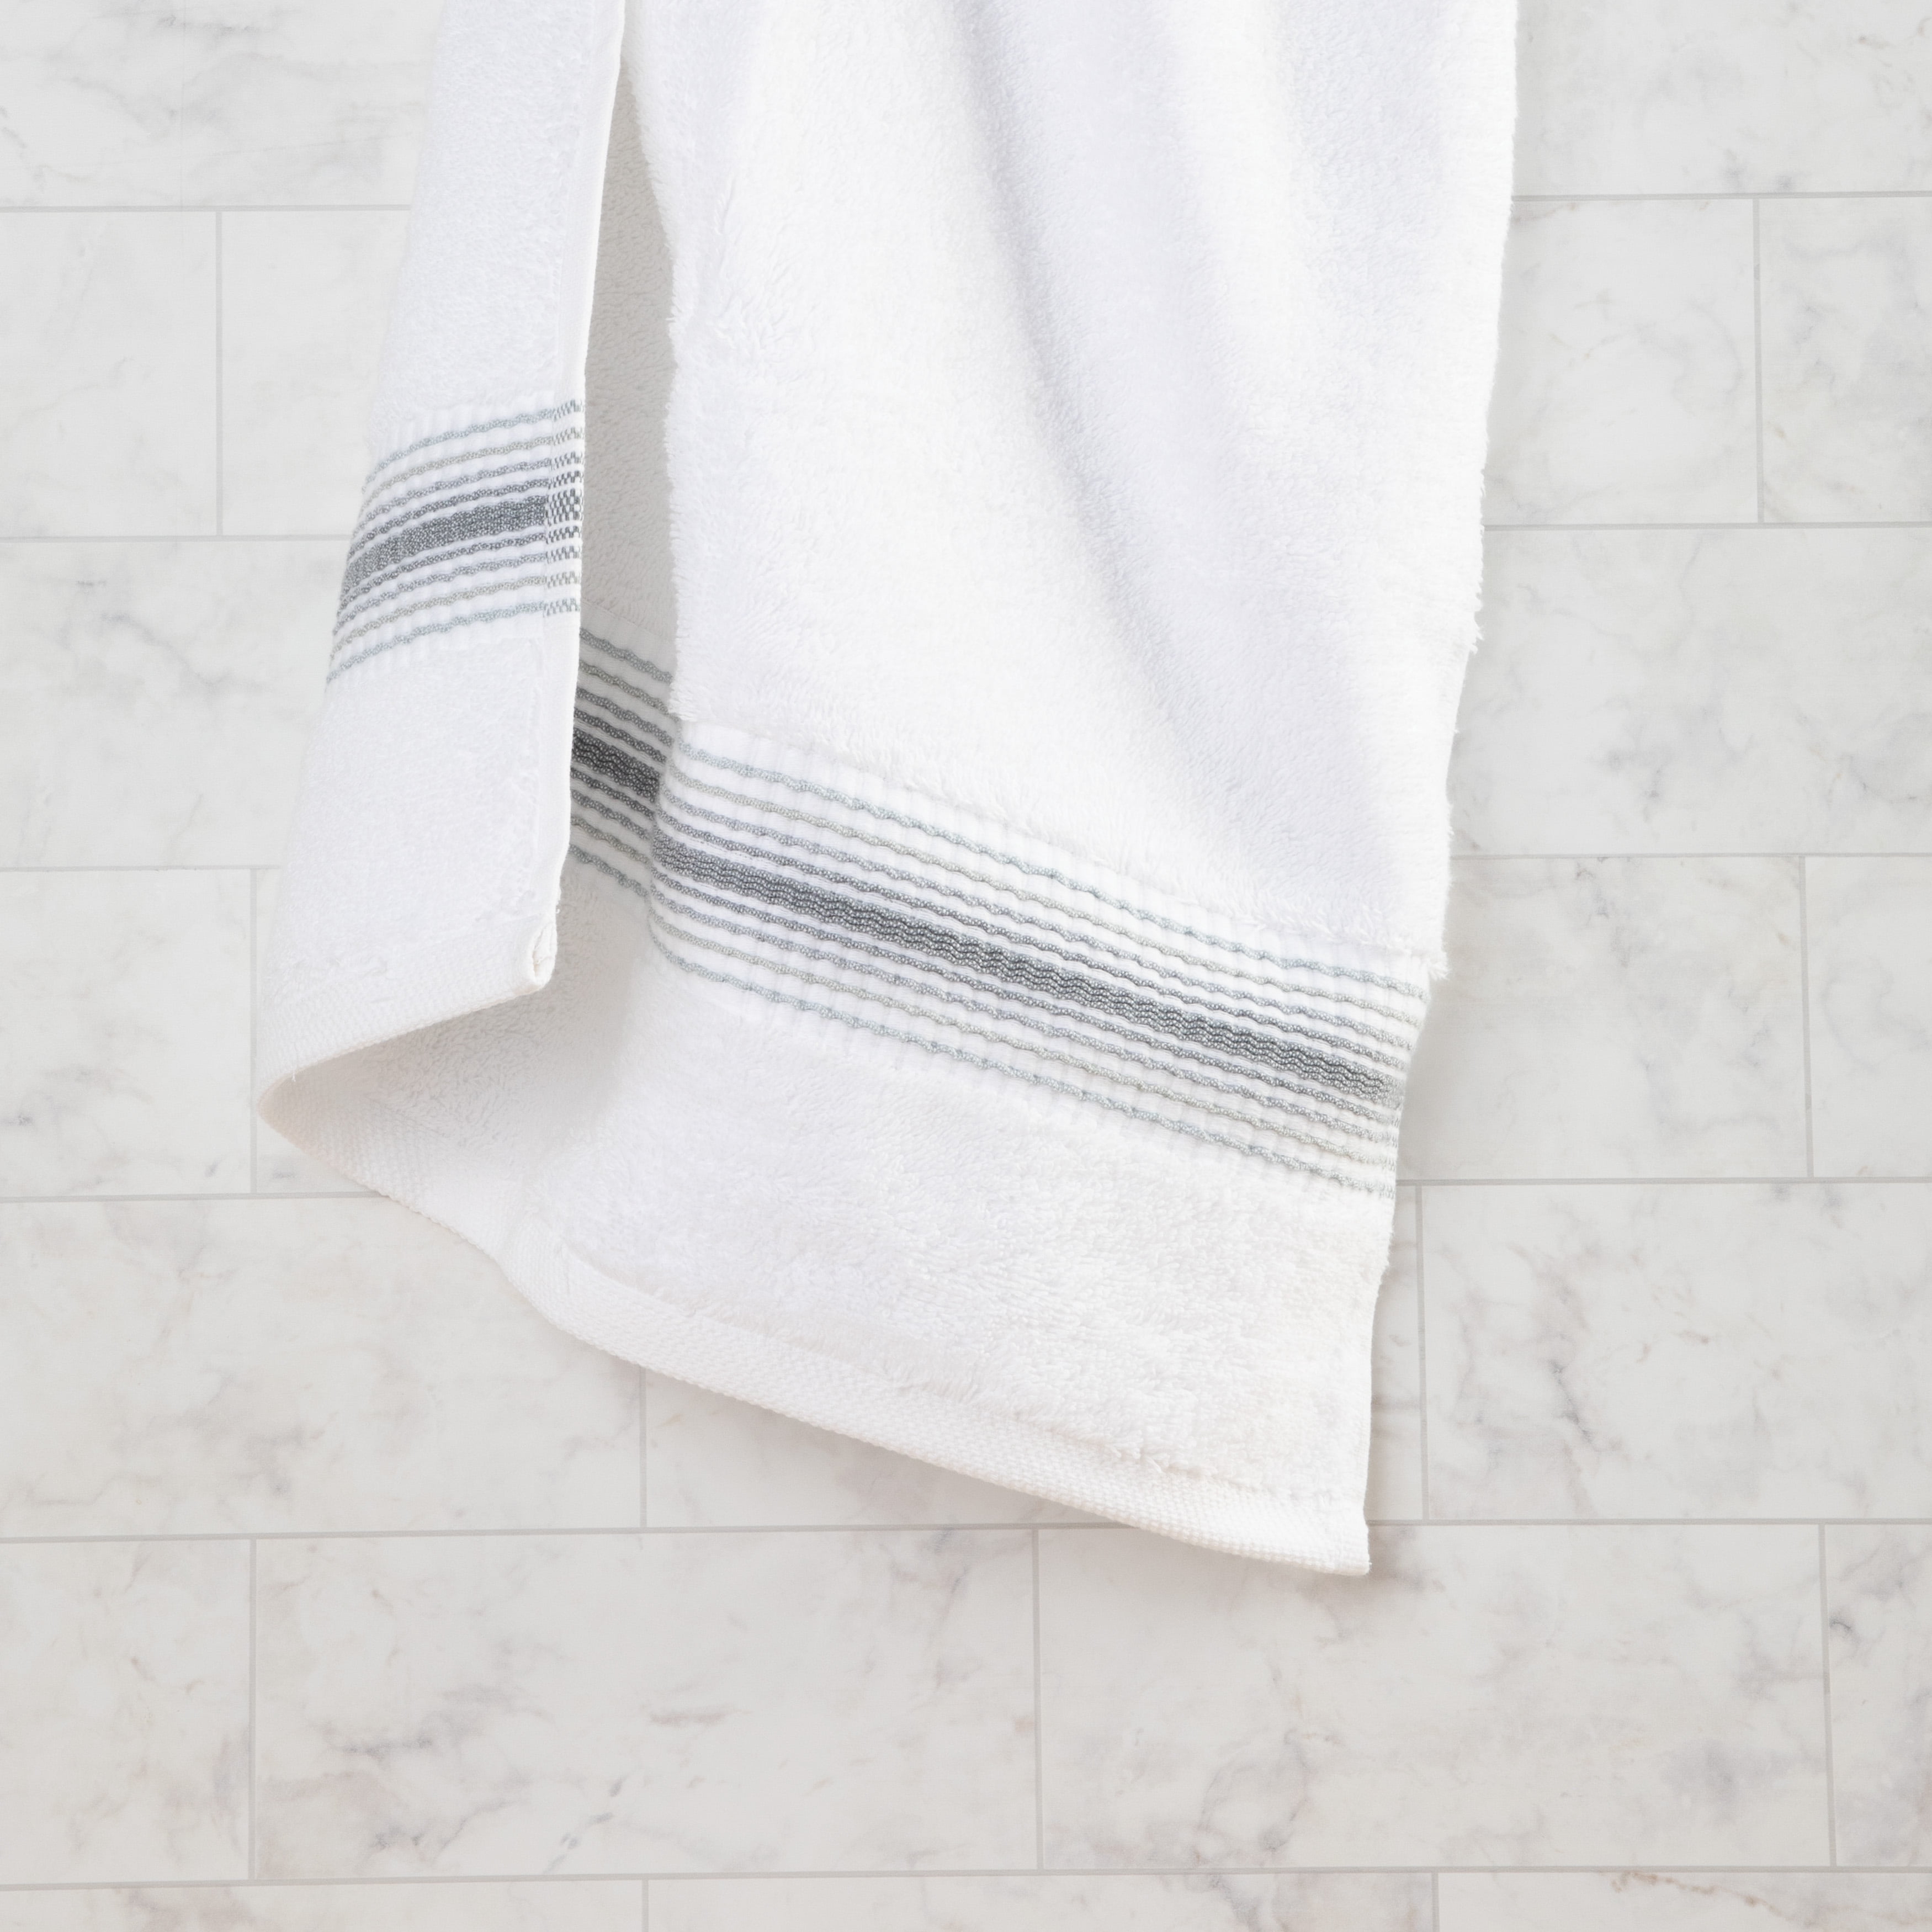 Aston and Arden White Turkish Luxury Striped Hand Towels for Bathroom 600 gsm, 18x32 in., 4-Pack , Super Soft Absorbent Hand Towels - Slate